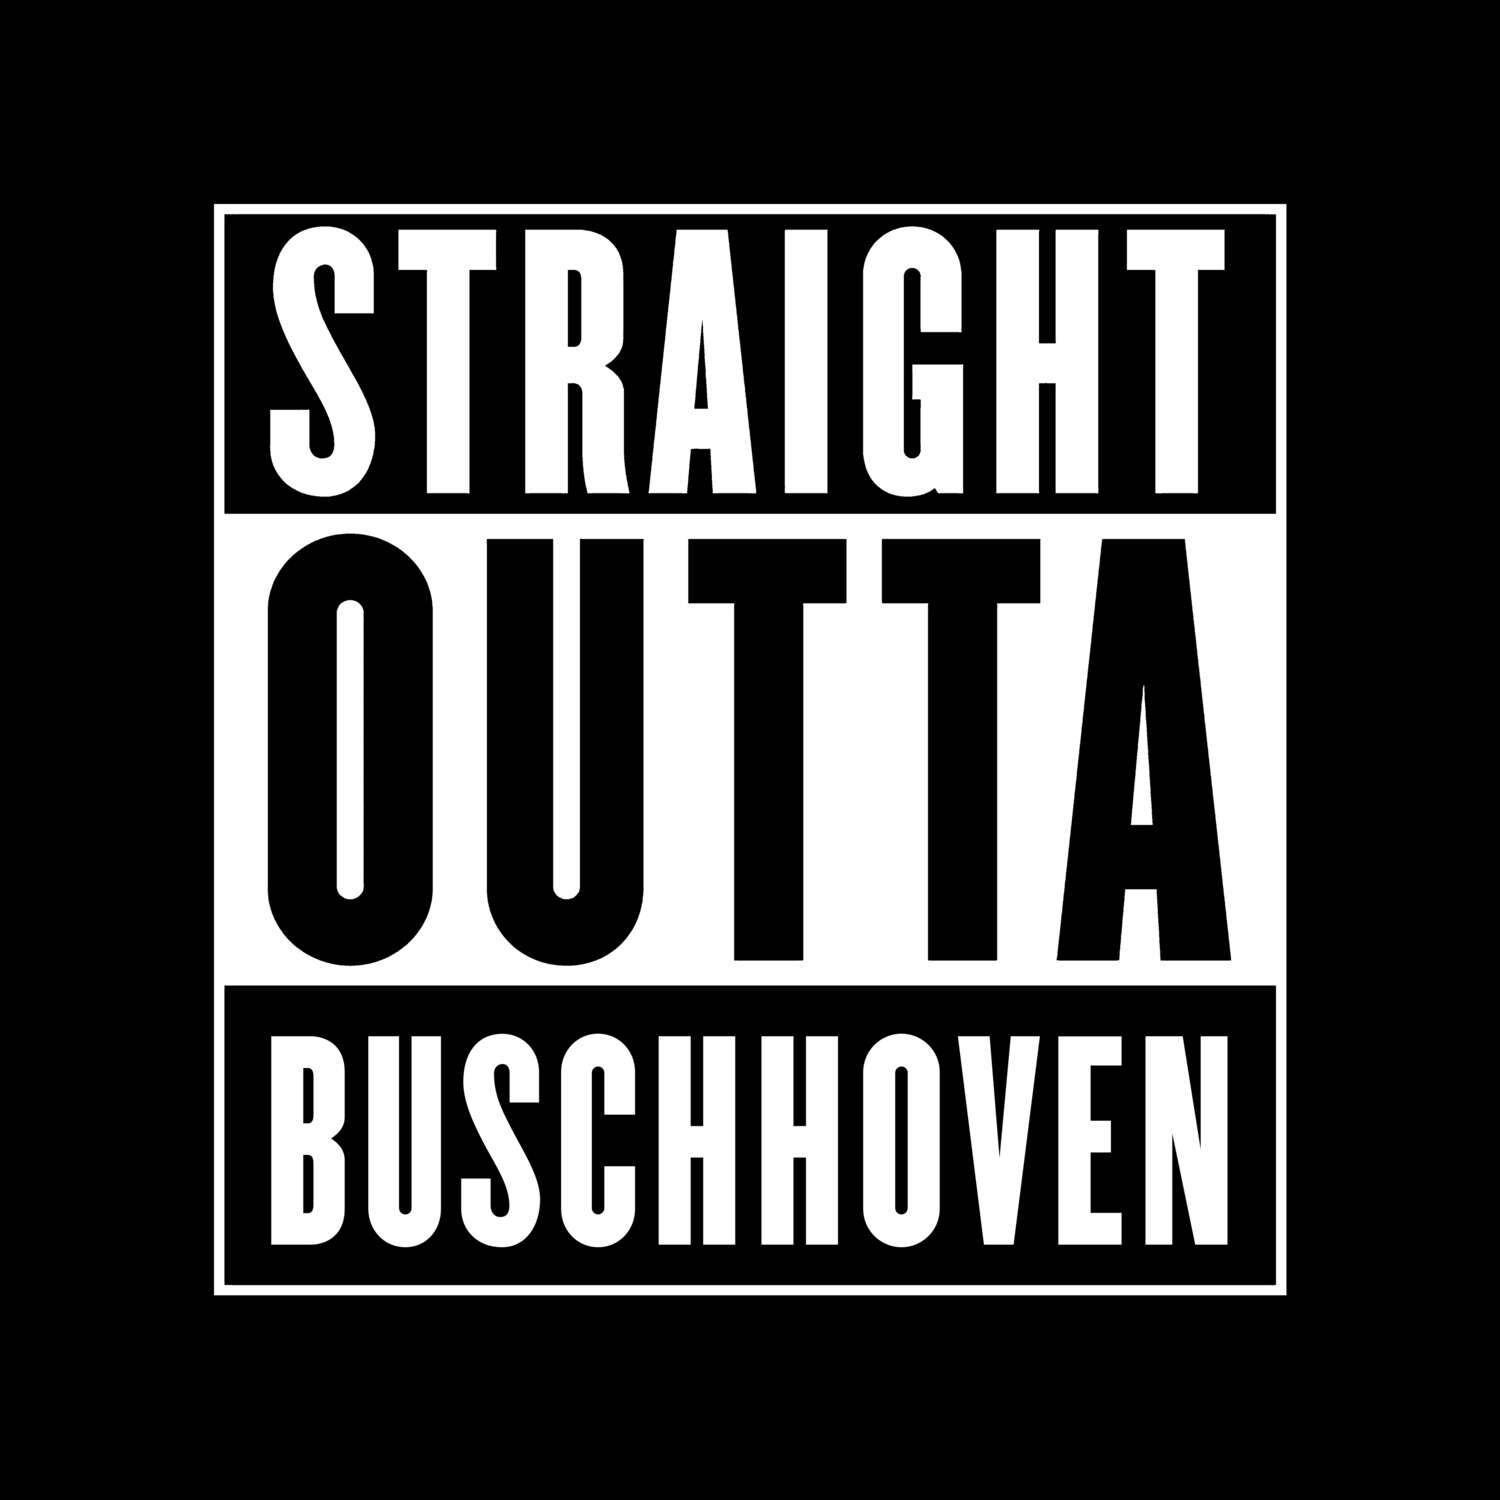 Buschhoven T-Shirt »Straight Outta«